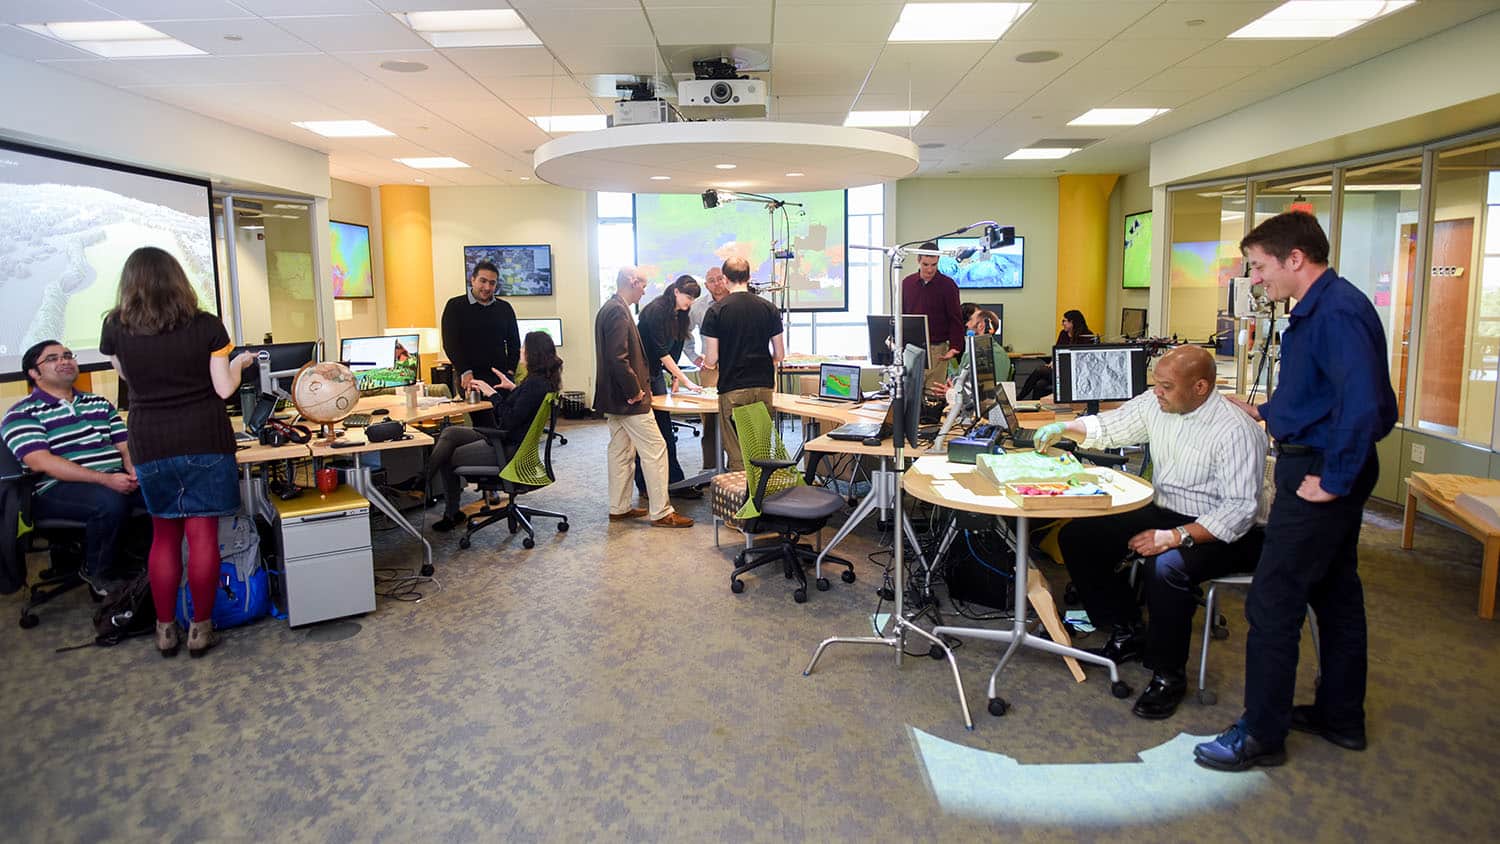 A wide shot shows researchers working on various projects in the Geospatial Visualization Lab.